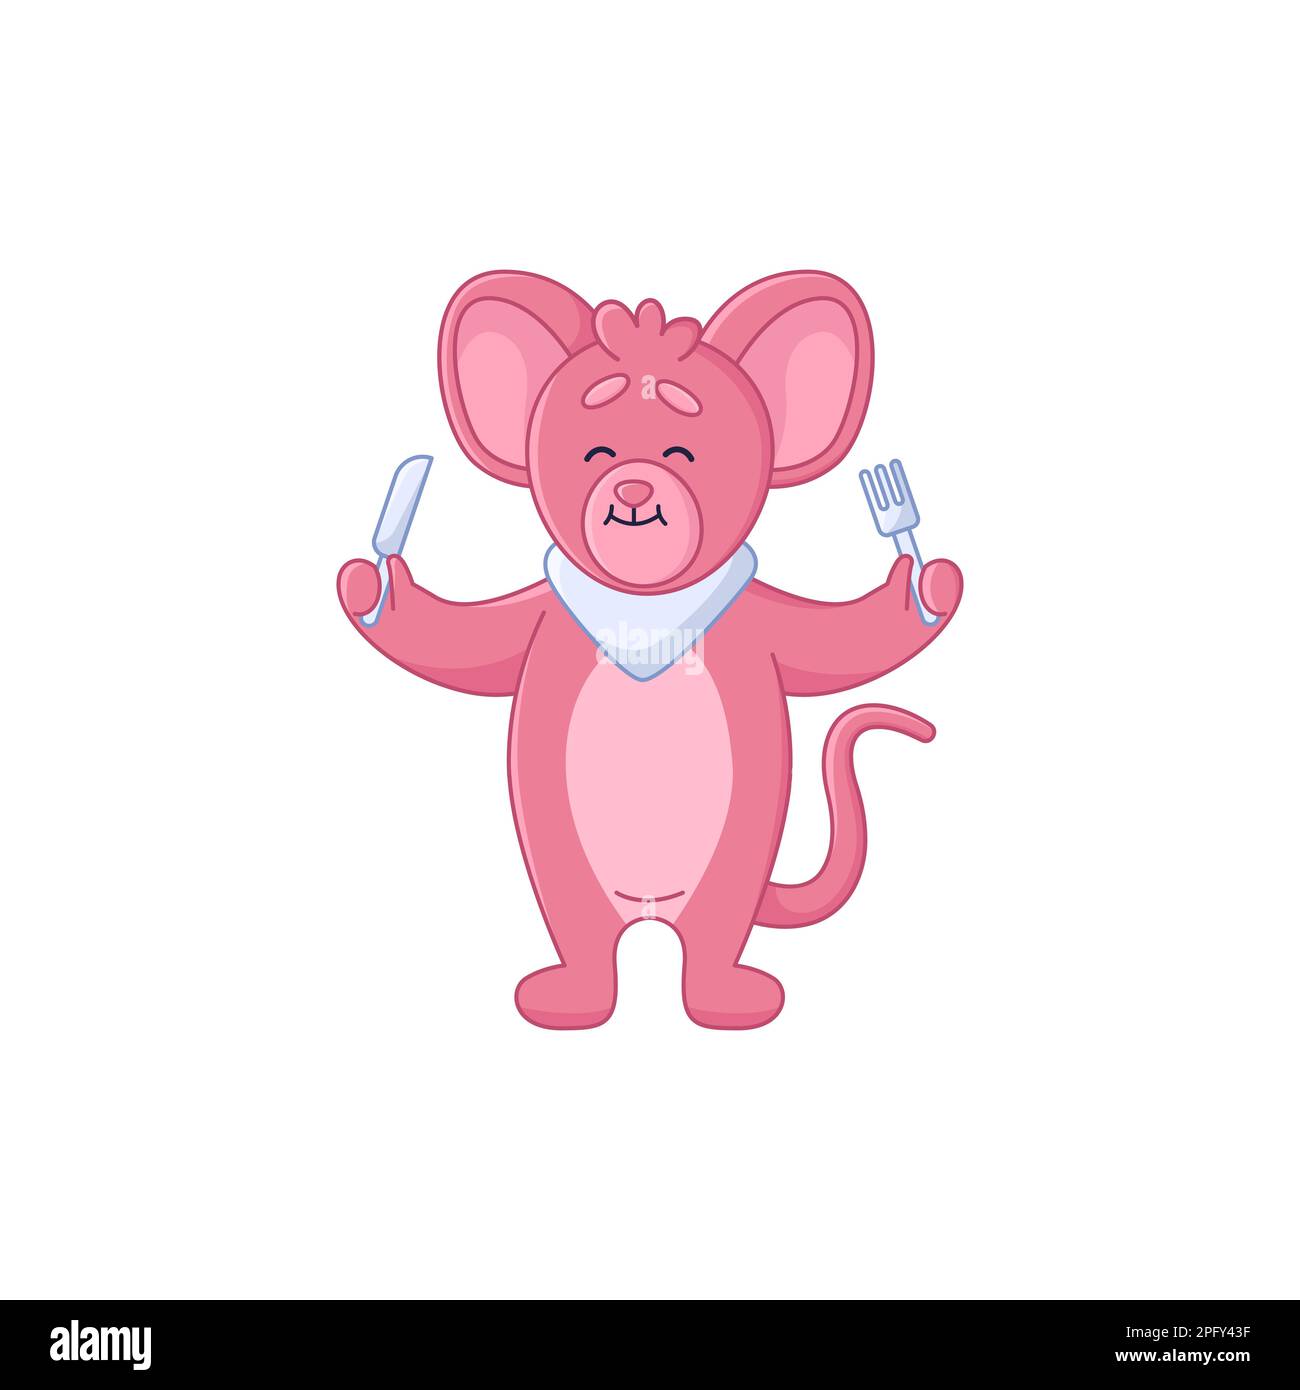 Cute pink mouse cartoon character holding knife and fork sticker Stock Vector